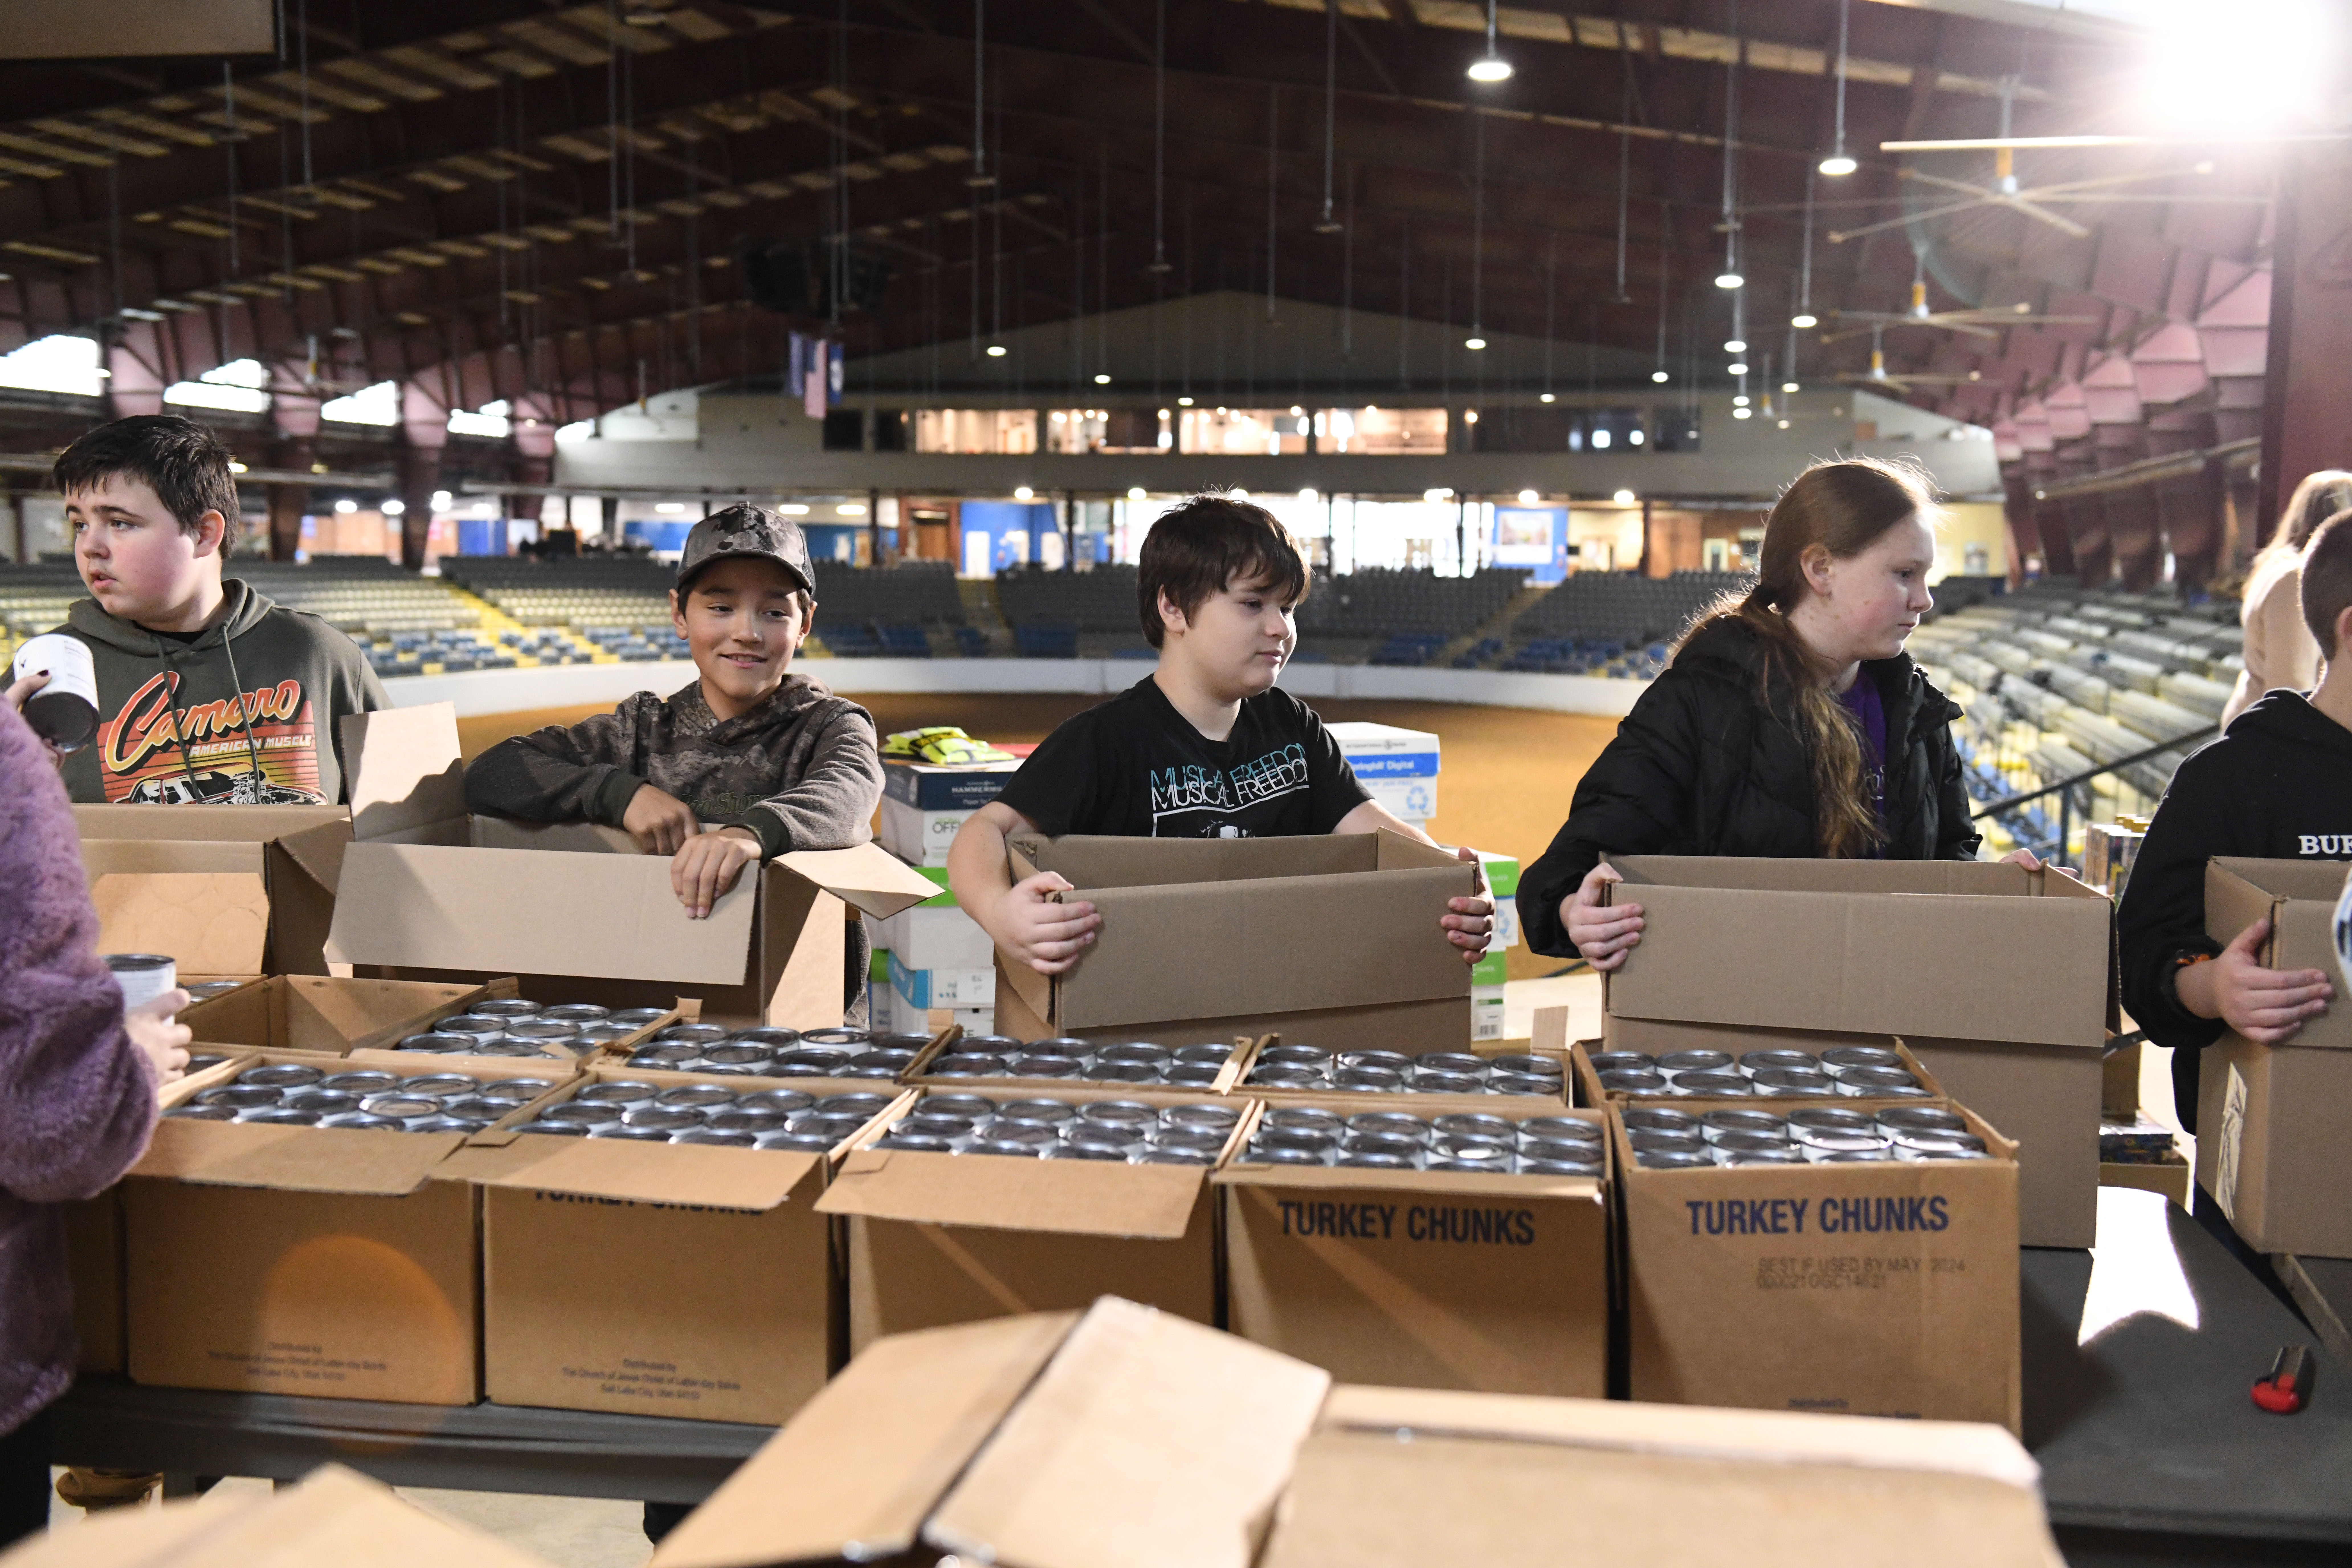 Three boys and one girl in line, each with a large cardboard boxes in hand, ready to add canned goods.